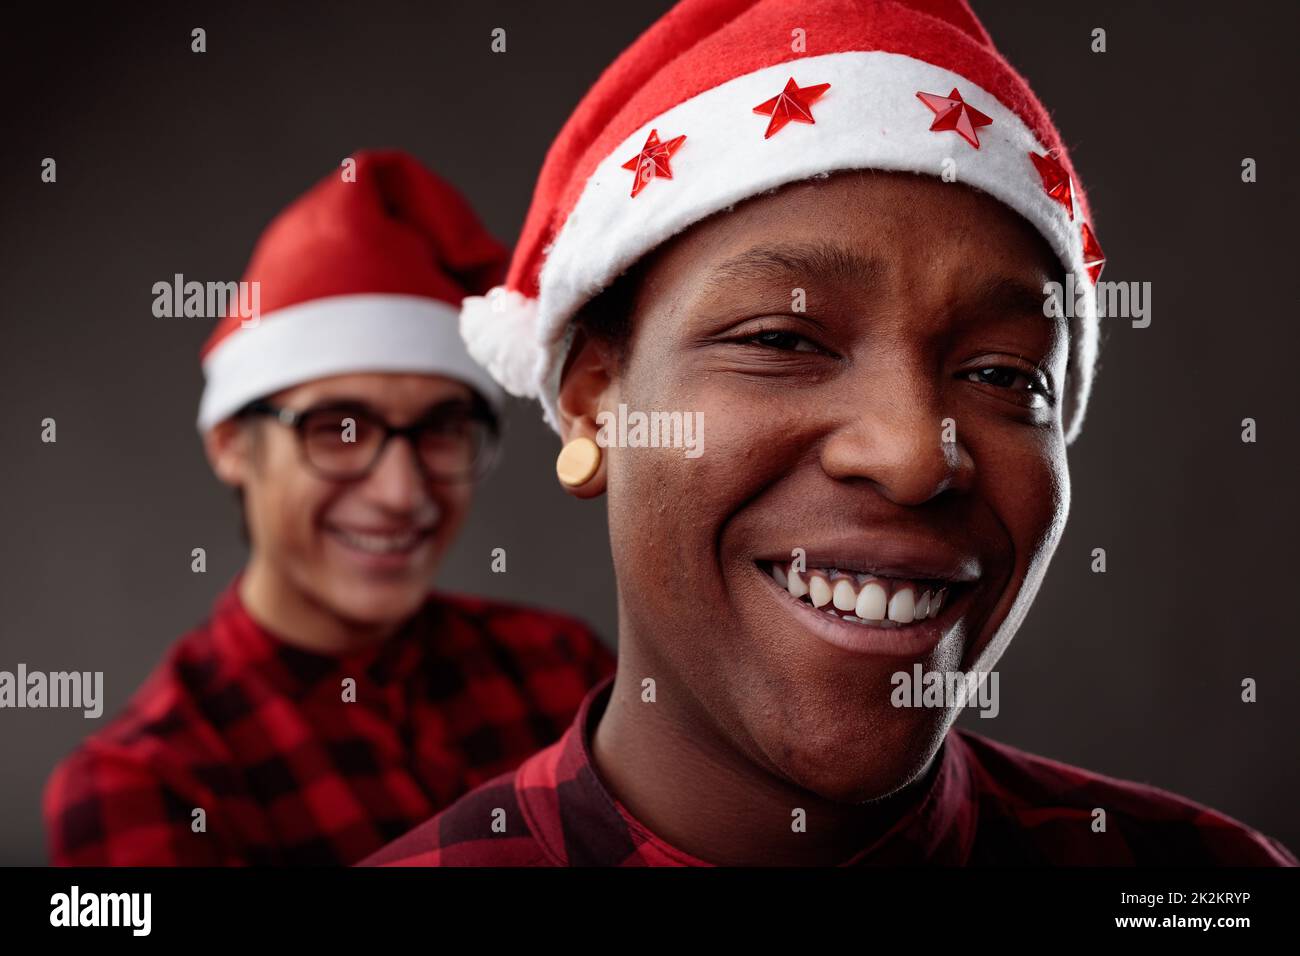 Happy smiling Black man wearing a red Santa hat for Christmas Stock Photo